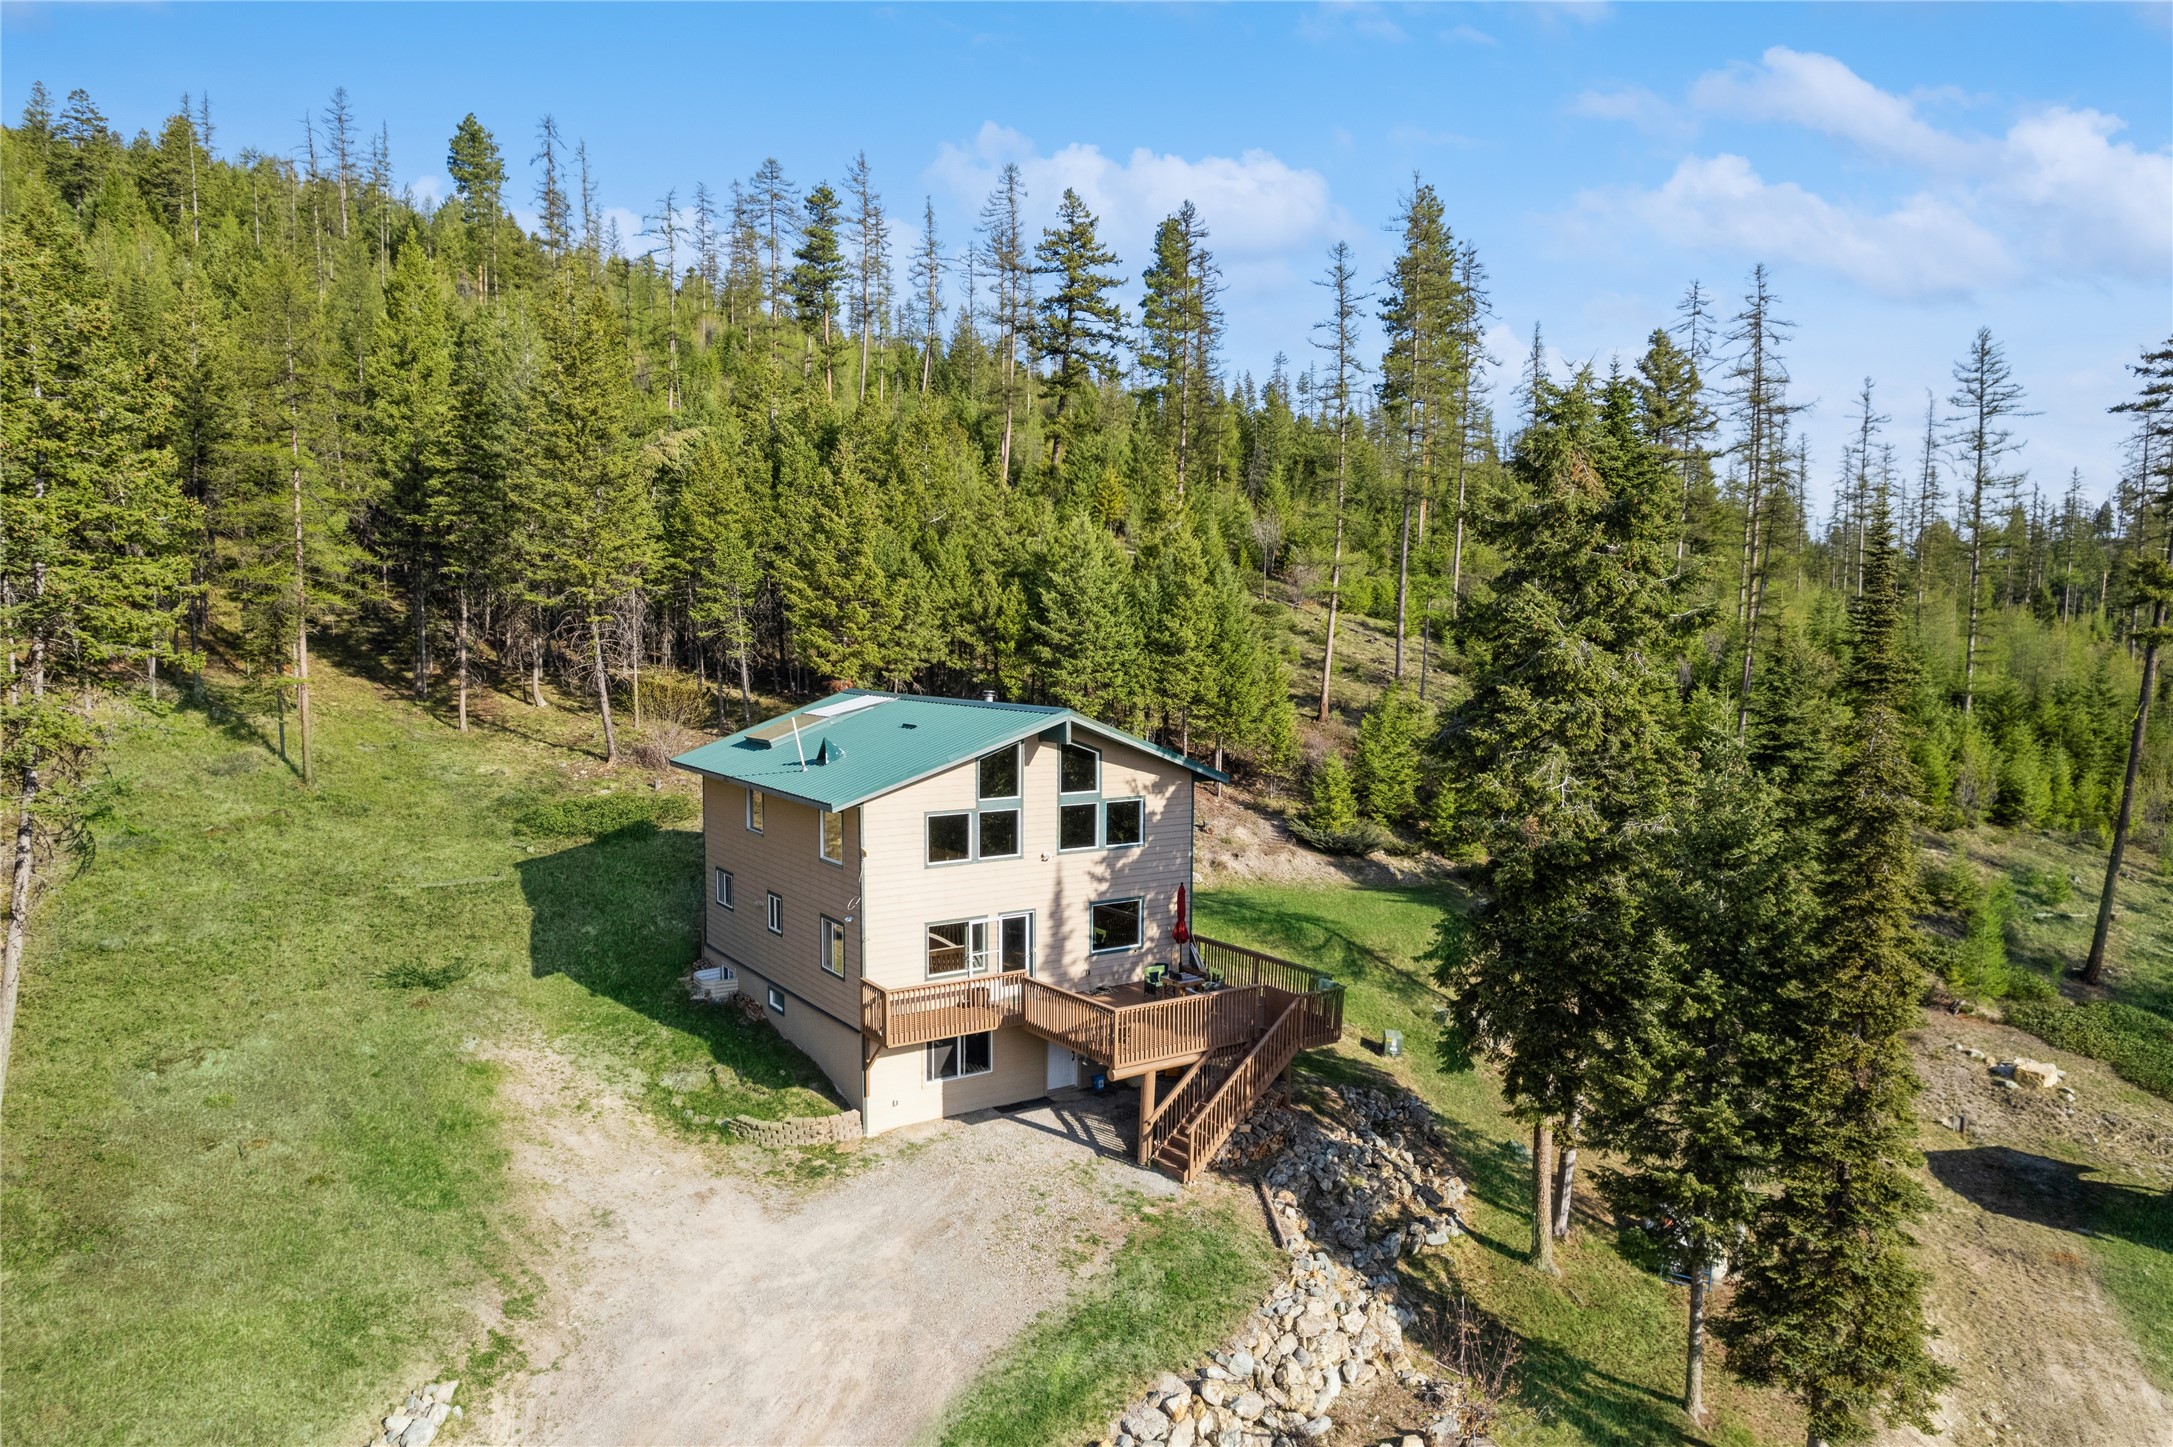 MOTIVATED SELLER for this home with end of the road privacy with over 13 acres of forest and meadows- adjacent to Stoltze Land & Lumber property.  3 bedrooms and 3 bathrooms on multiple levels provide an expansive interior of over 3000 square feet with bonus rooms throughout.  Upper level has bedroom, bath and loft with mountain views.  Main level consists of generously sized 2 bedrooms, bath, living, dining and kitchen as well as spacious deck.  Lower level has accommodating family/multi purpose room, bonus room with plenty of light and a bathroom.  Eastern portion of property is relatively level with grass area.  Forest proceeds up the hillside to the west.  Ample room for additional structures.  Convenient location approximately 5 miles from Farm to Market Road.  Easy access to Kalispell.